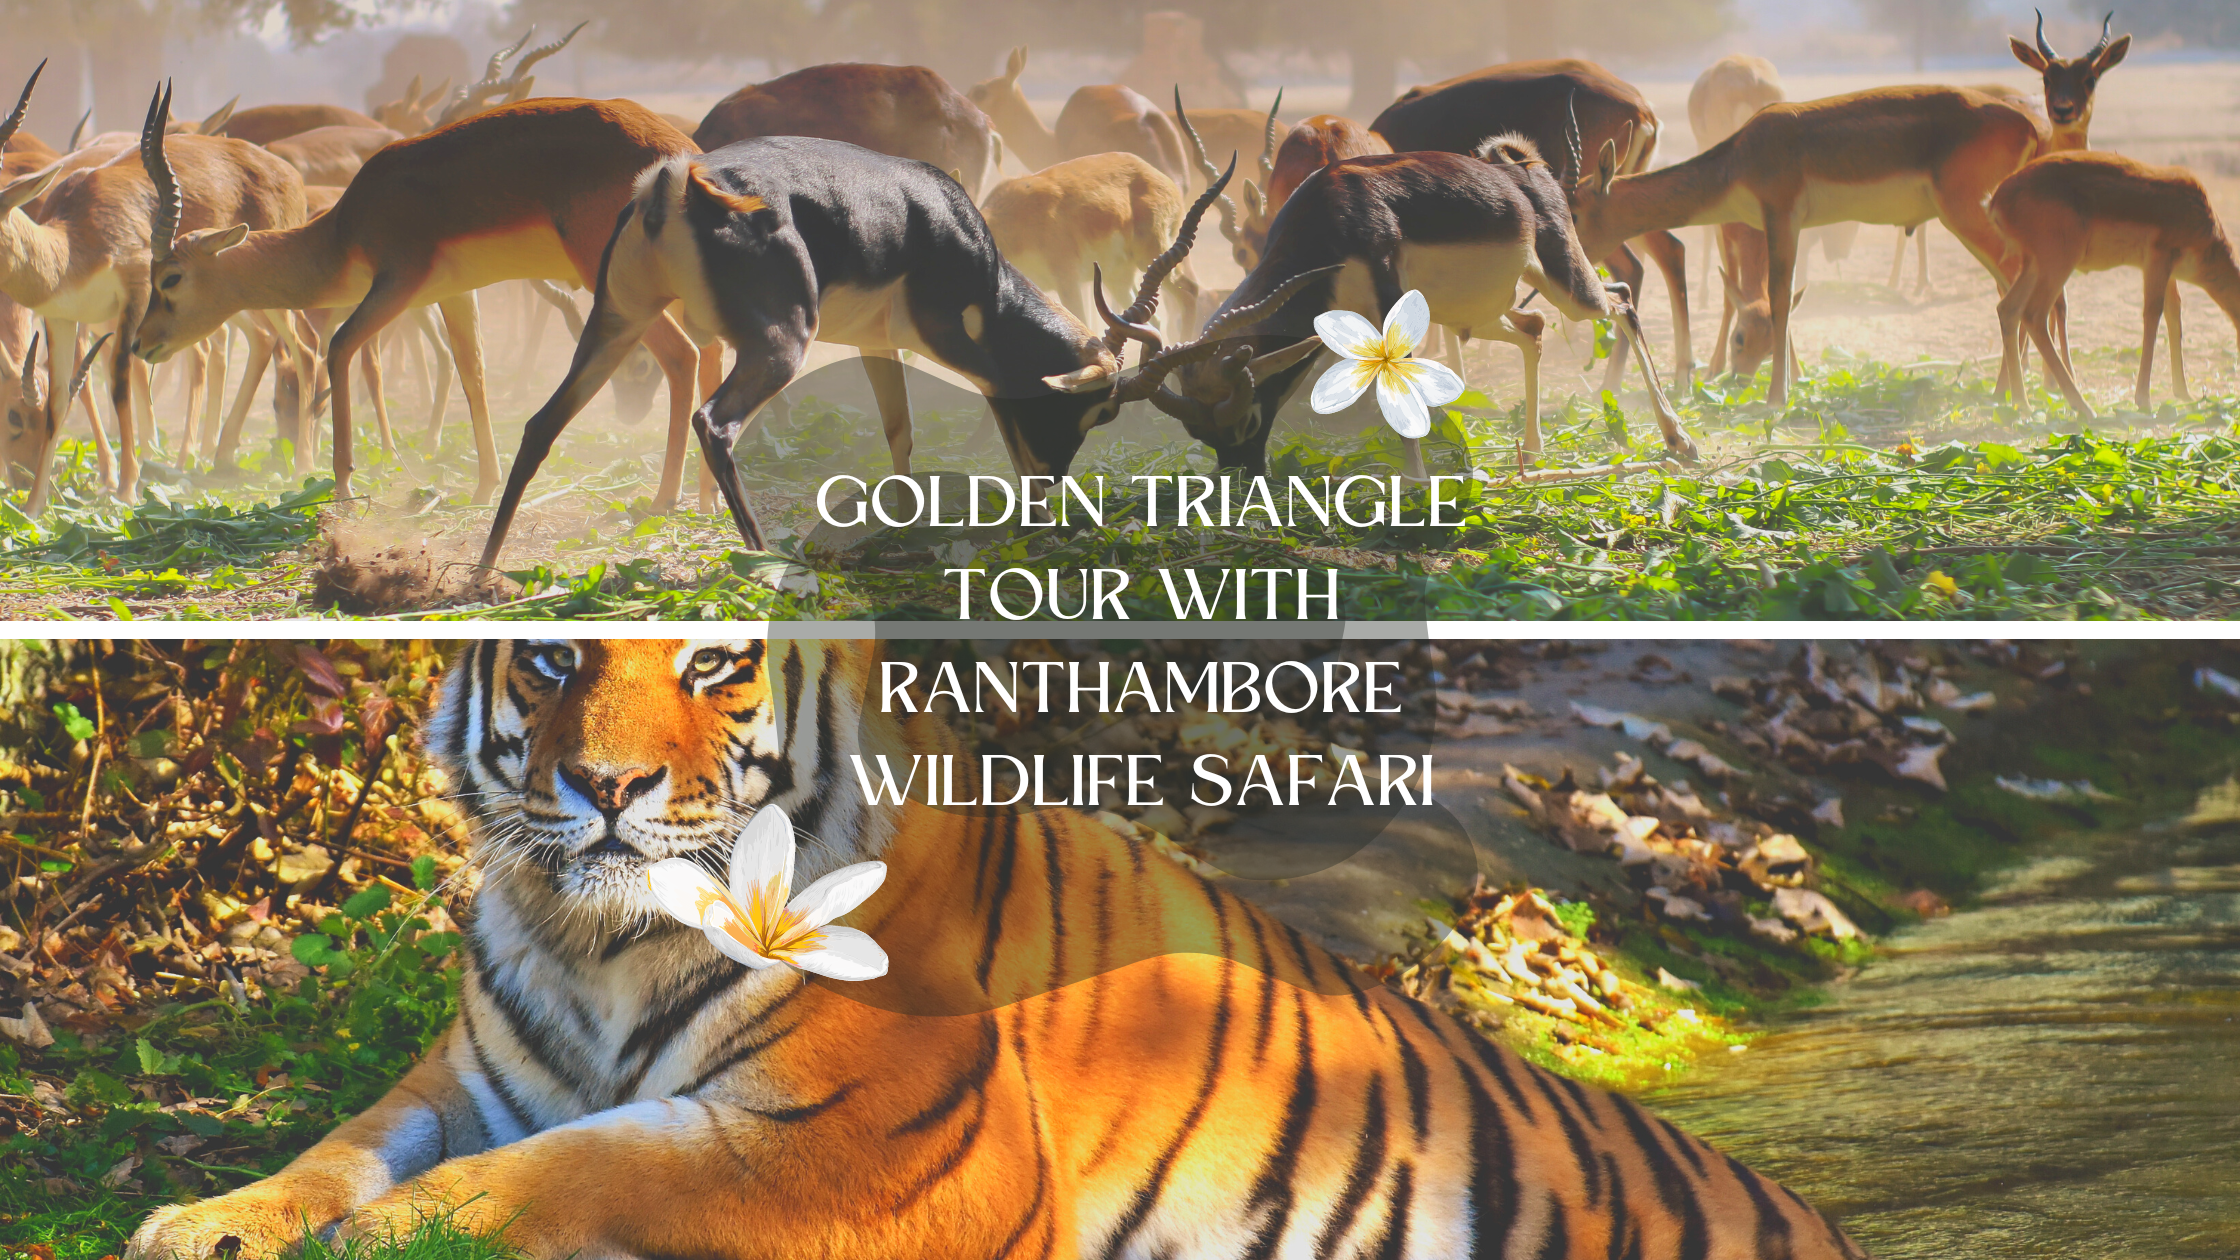 Experience India's Most Exquisite Treasures On A Golden Triangle Tour With Ranthambore Wildlife Safari